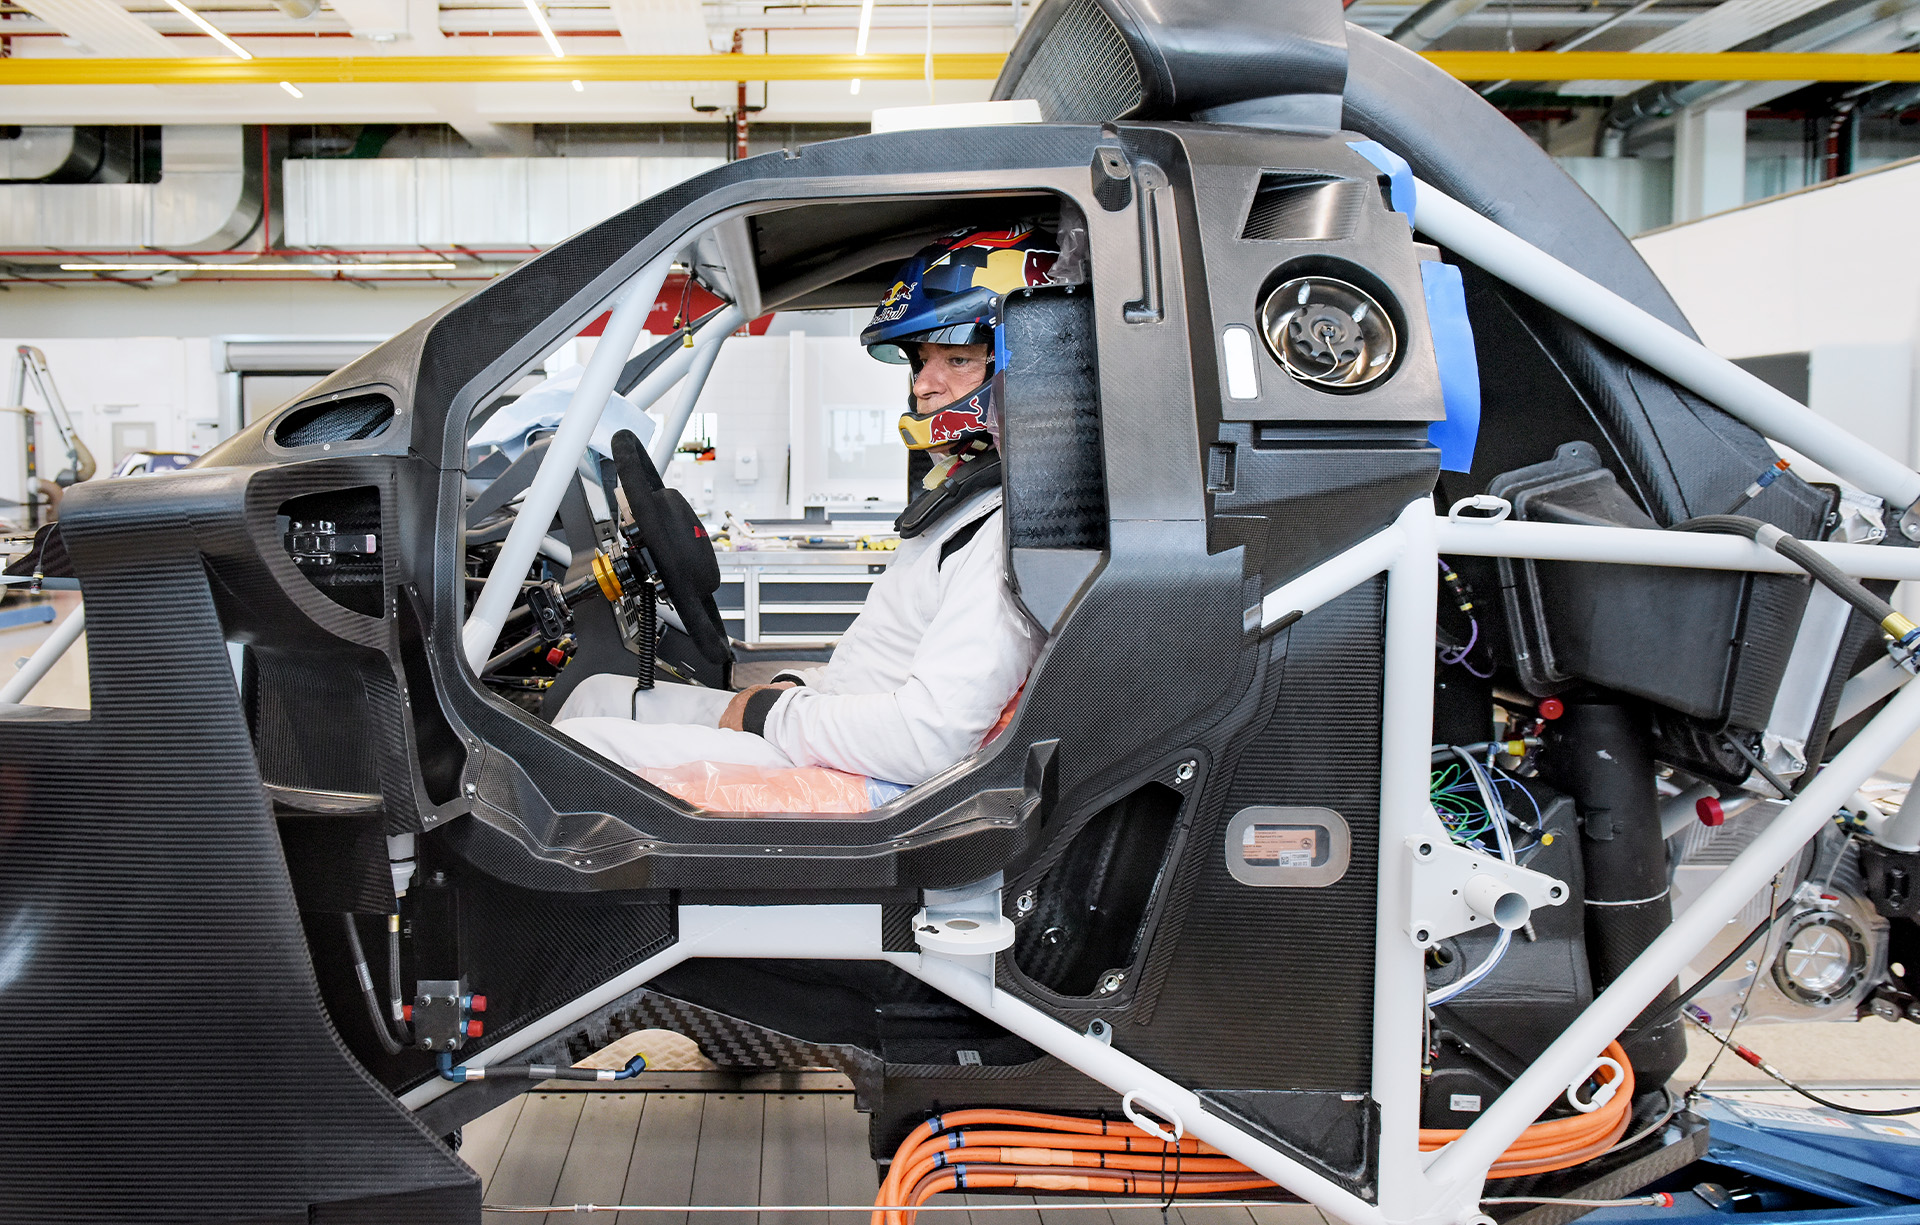 Carlos Sainz, one of Audi Sport’s Dakar Rally drivers, in the cage of the rally car at the seat fitting. He sits behind the wheel on an orange foam cushion. 